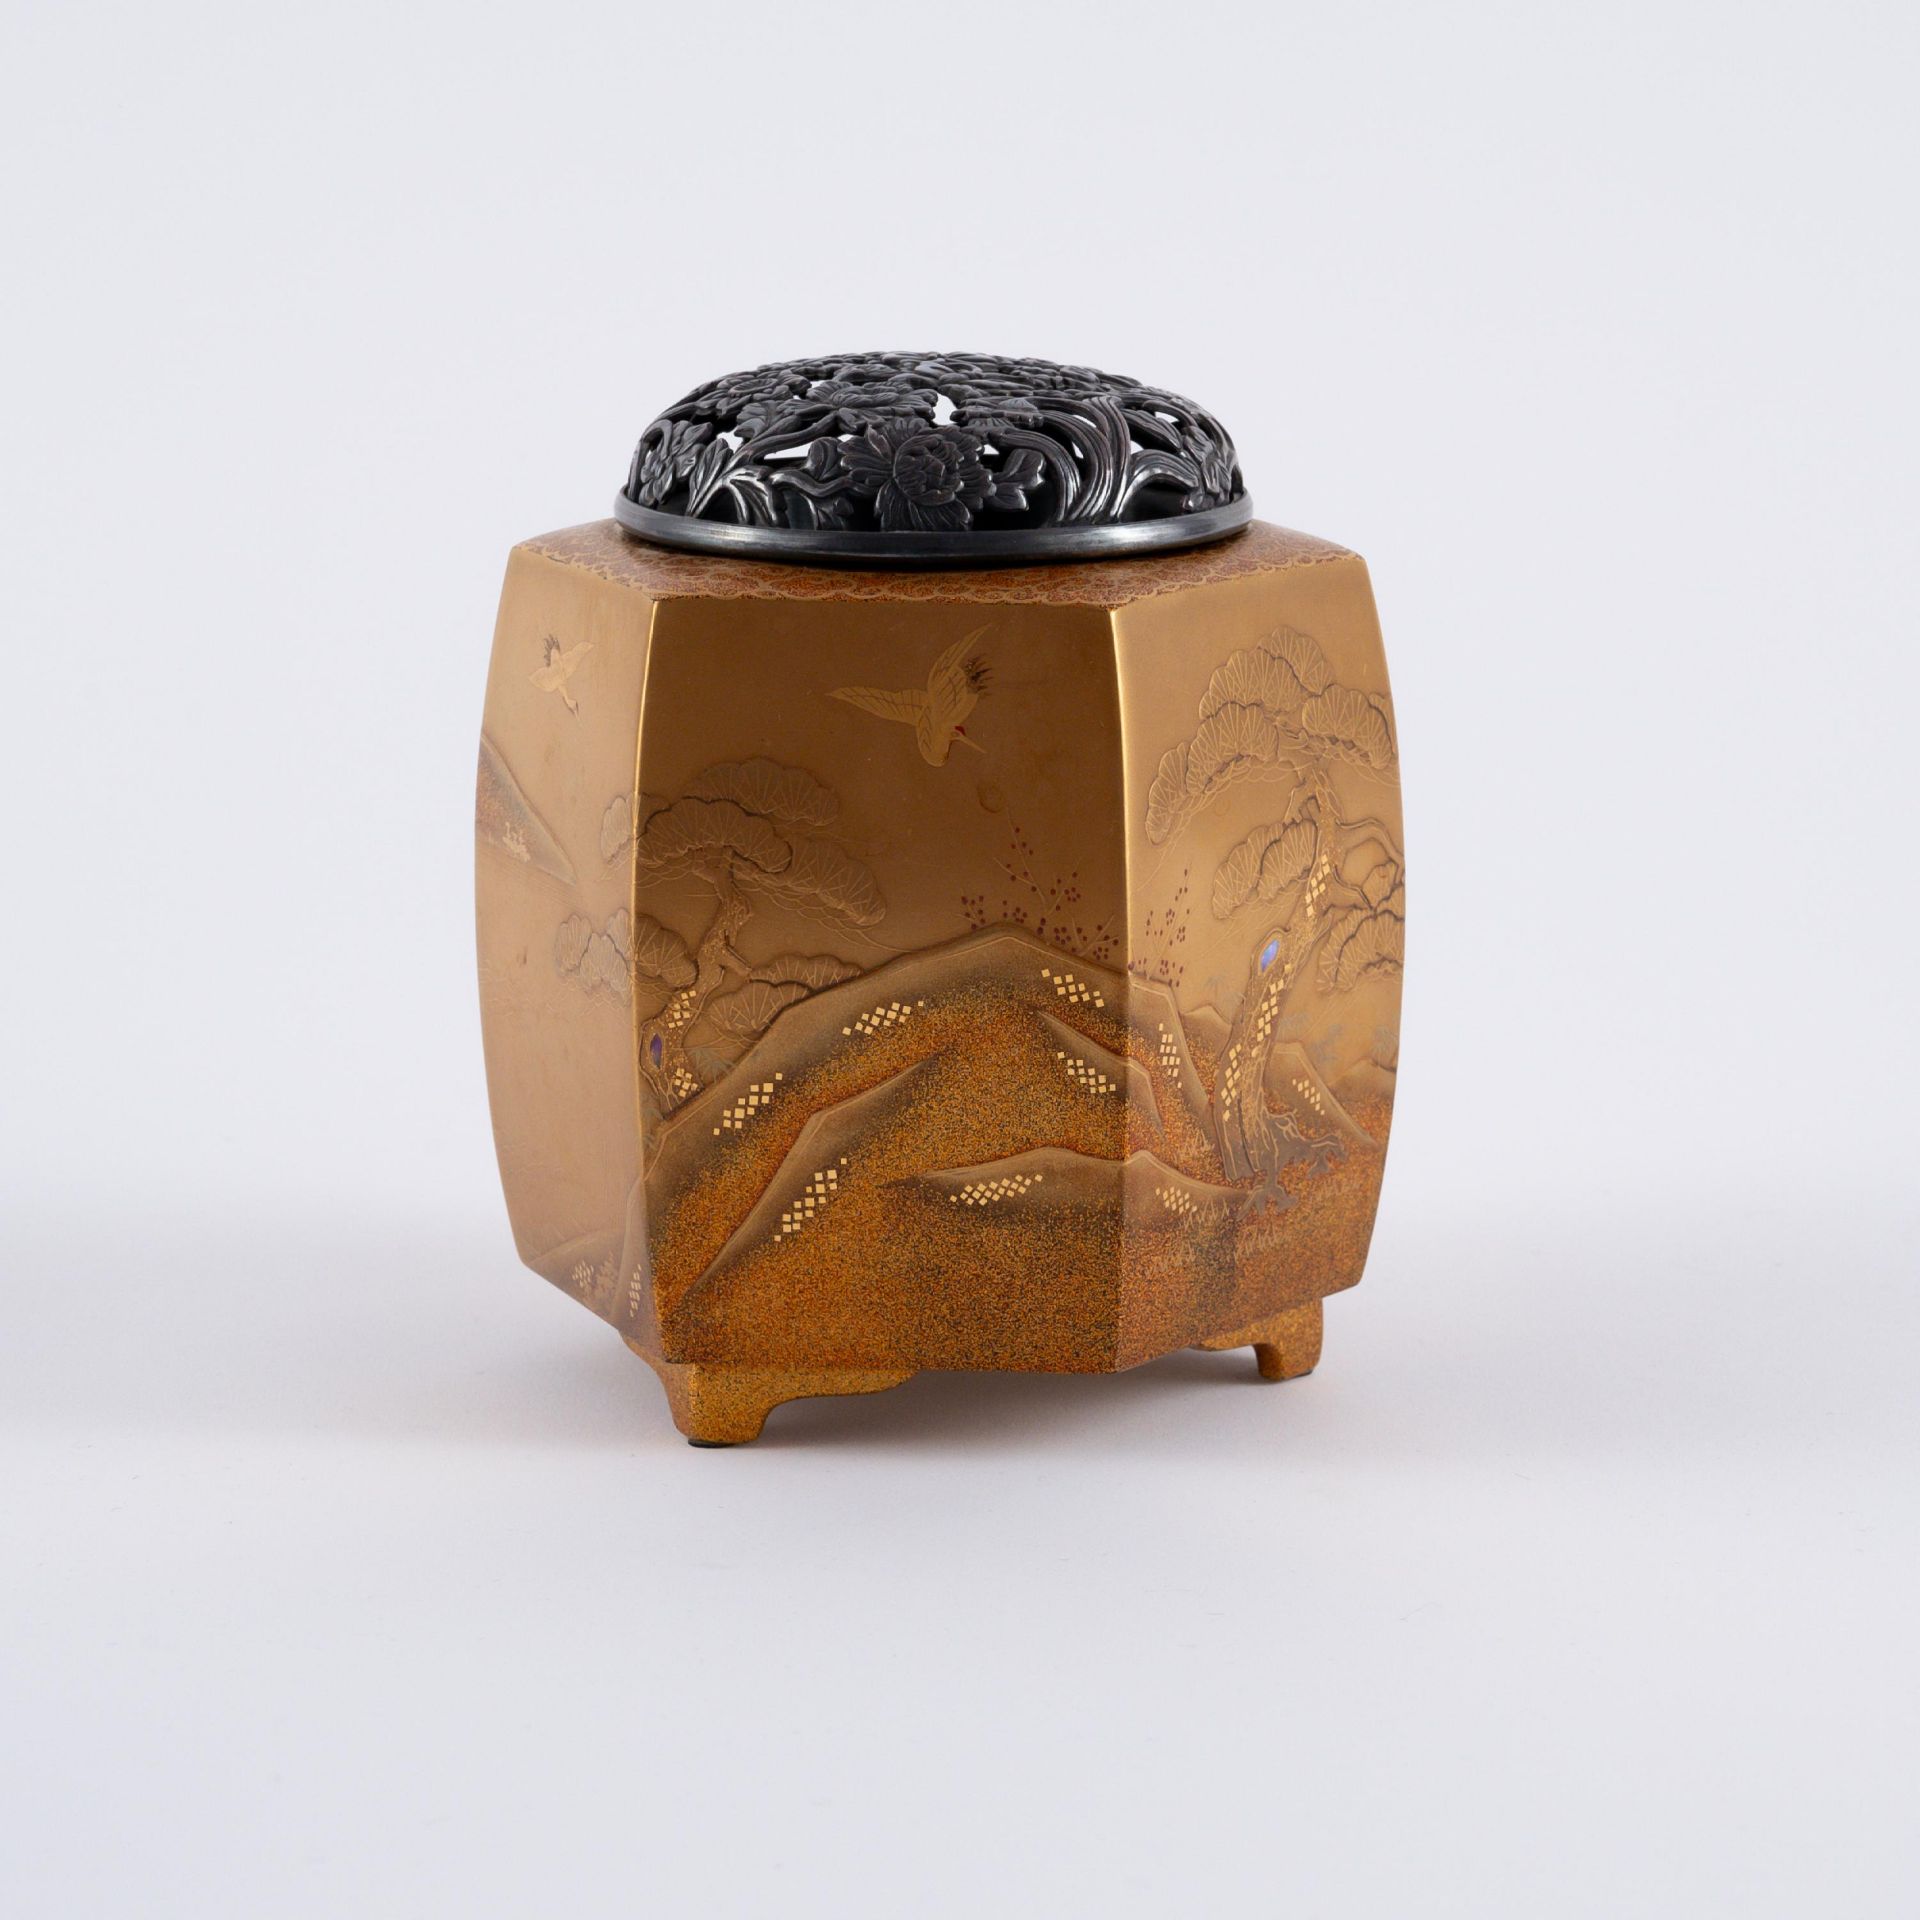 GOLD AND SILVER POT POURRI VESSEL WITH LAKE SCENERY AND PINE - Image 4 of 6